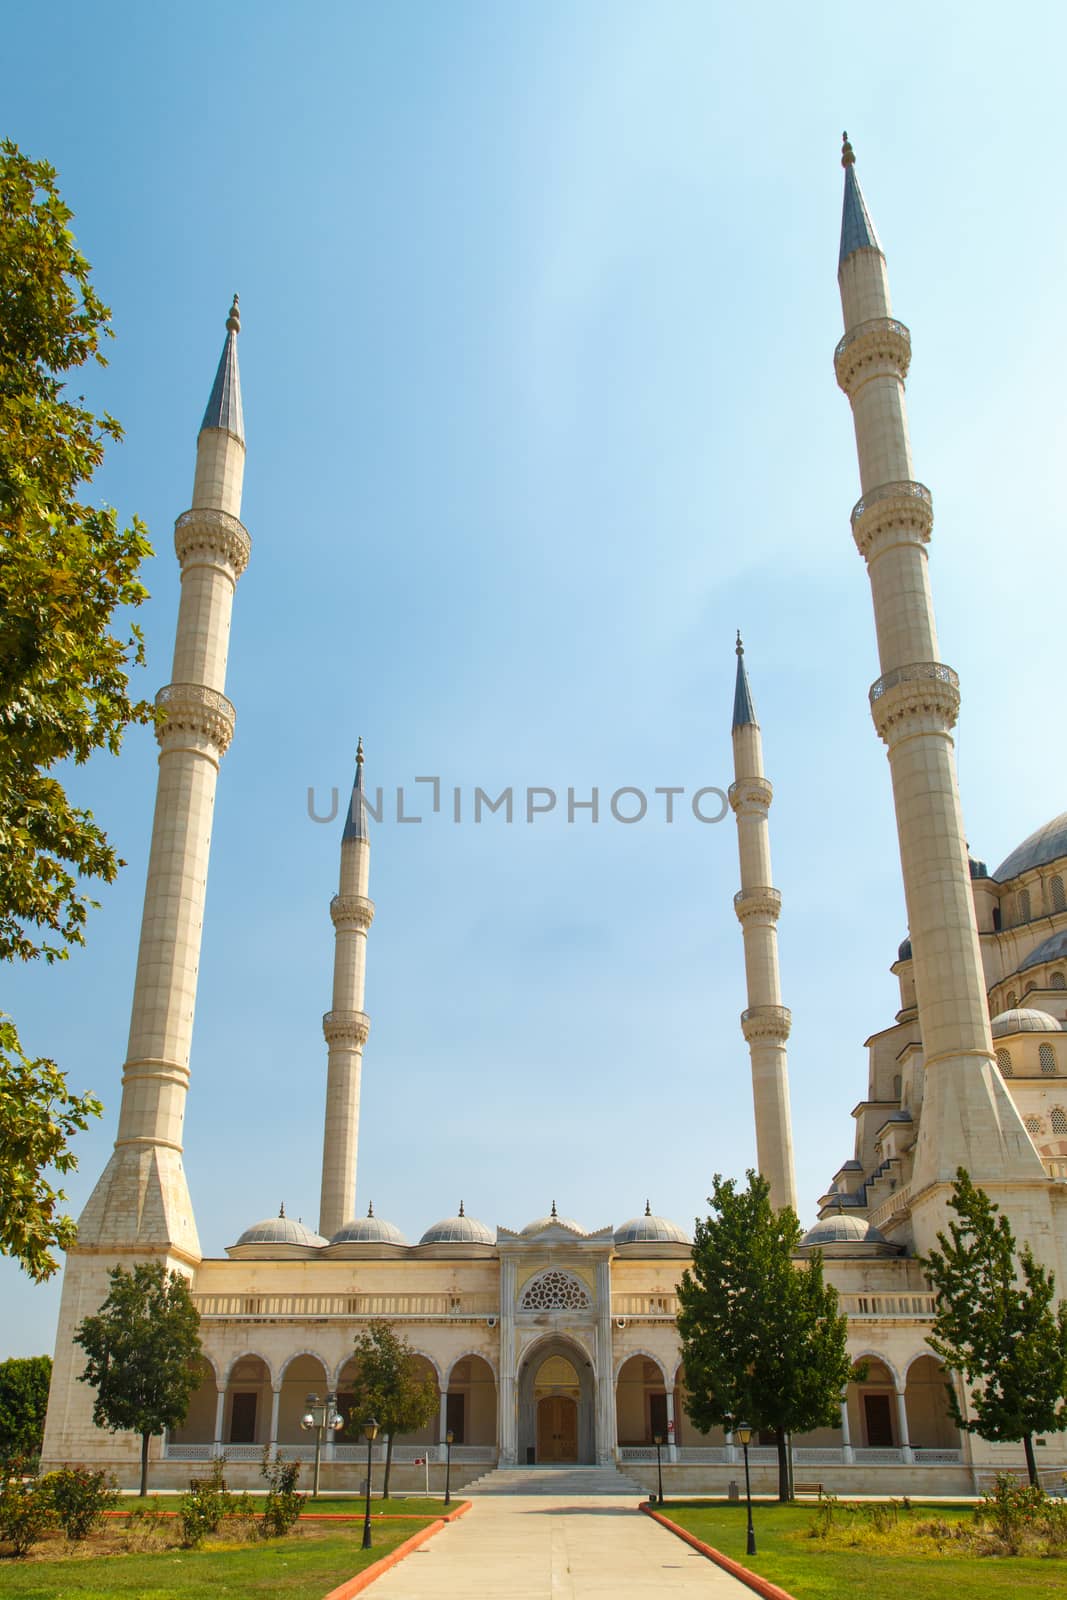 Exterior front view of Adana Sabanci Mosque, with six minarets, on bright blue sky background.